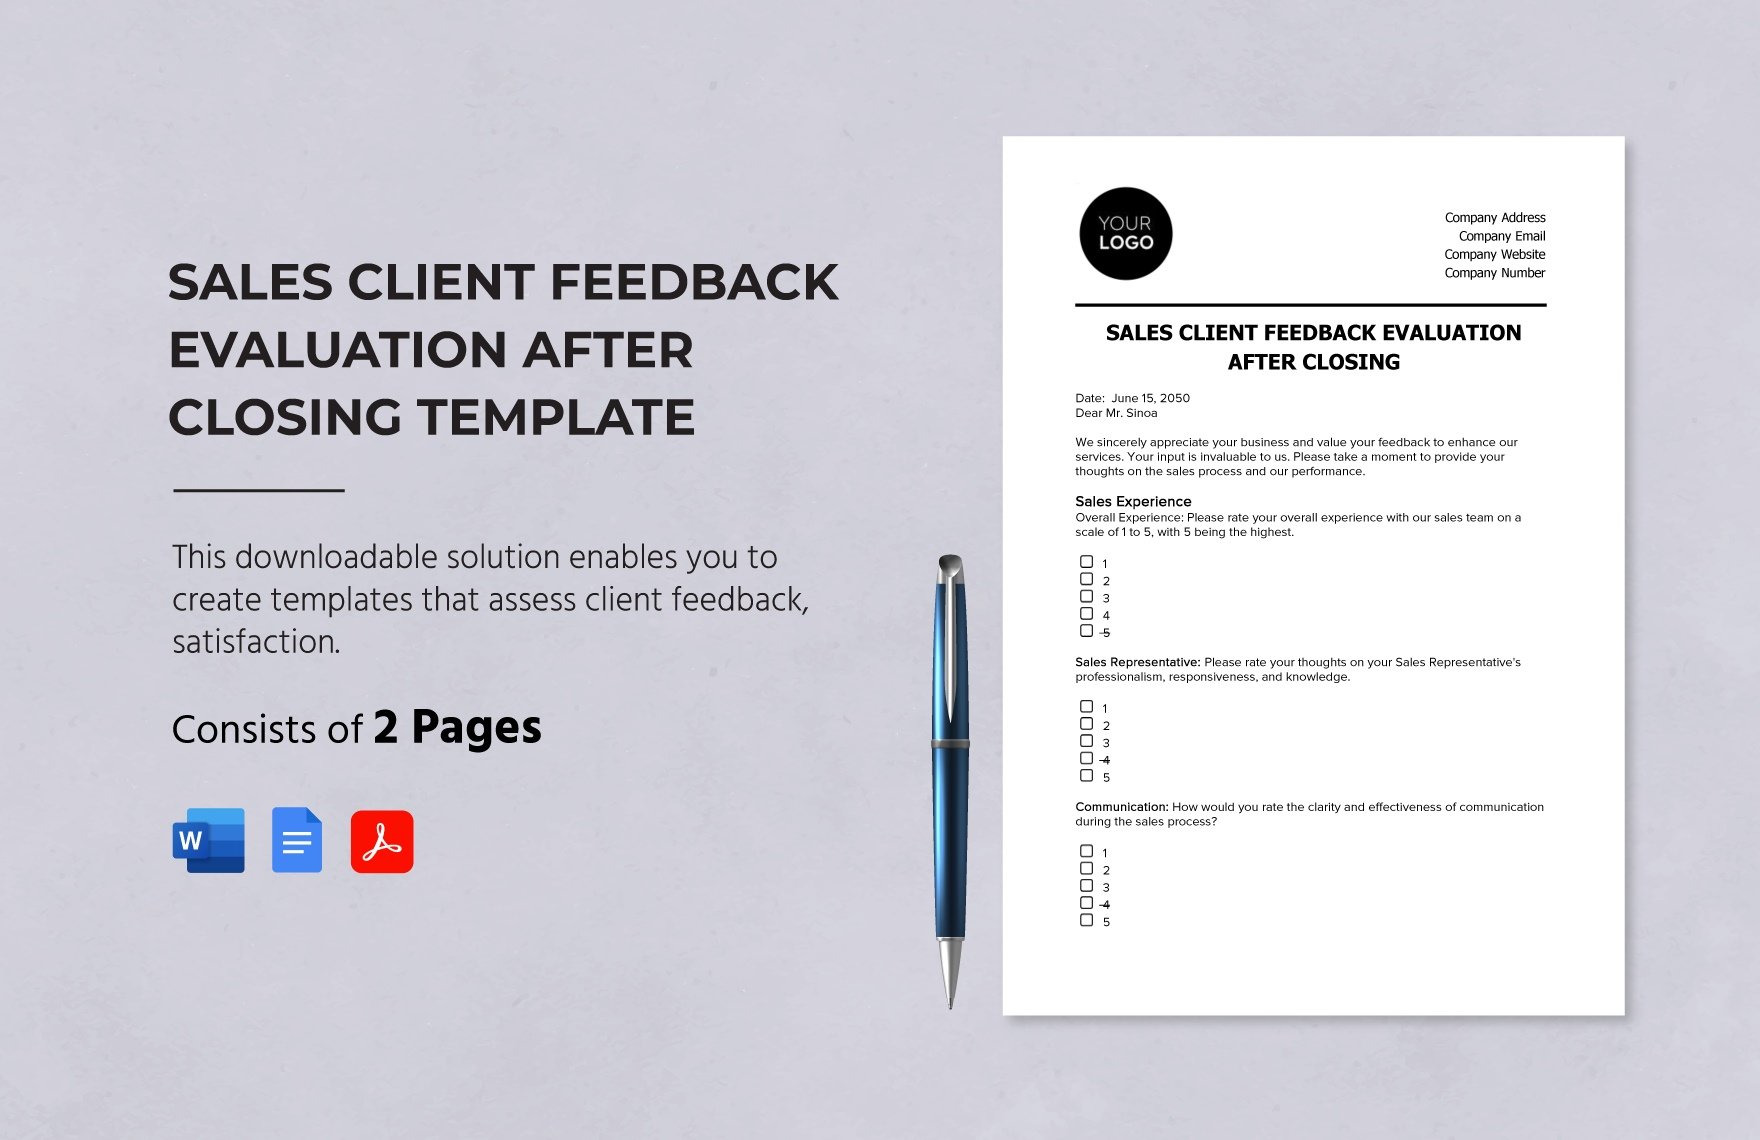 Sales Client Feedback Evaluation after Closing Template in Word, Google Docs, PDF